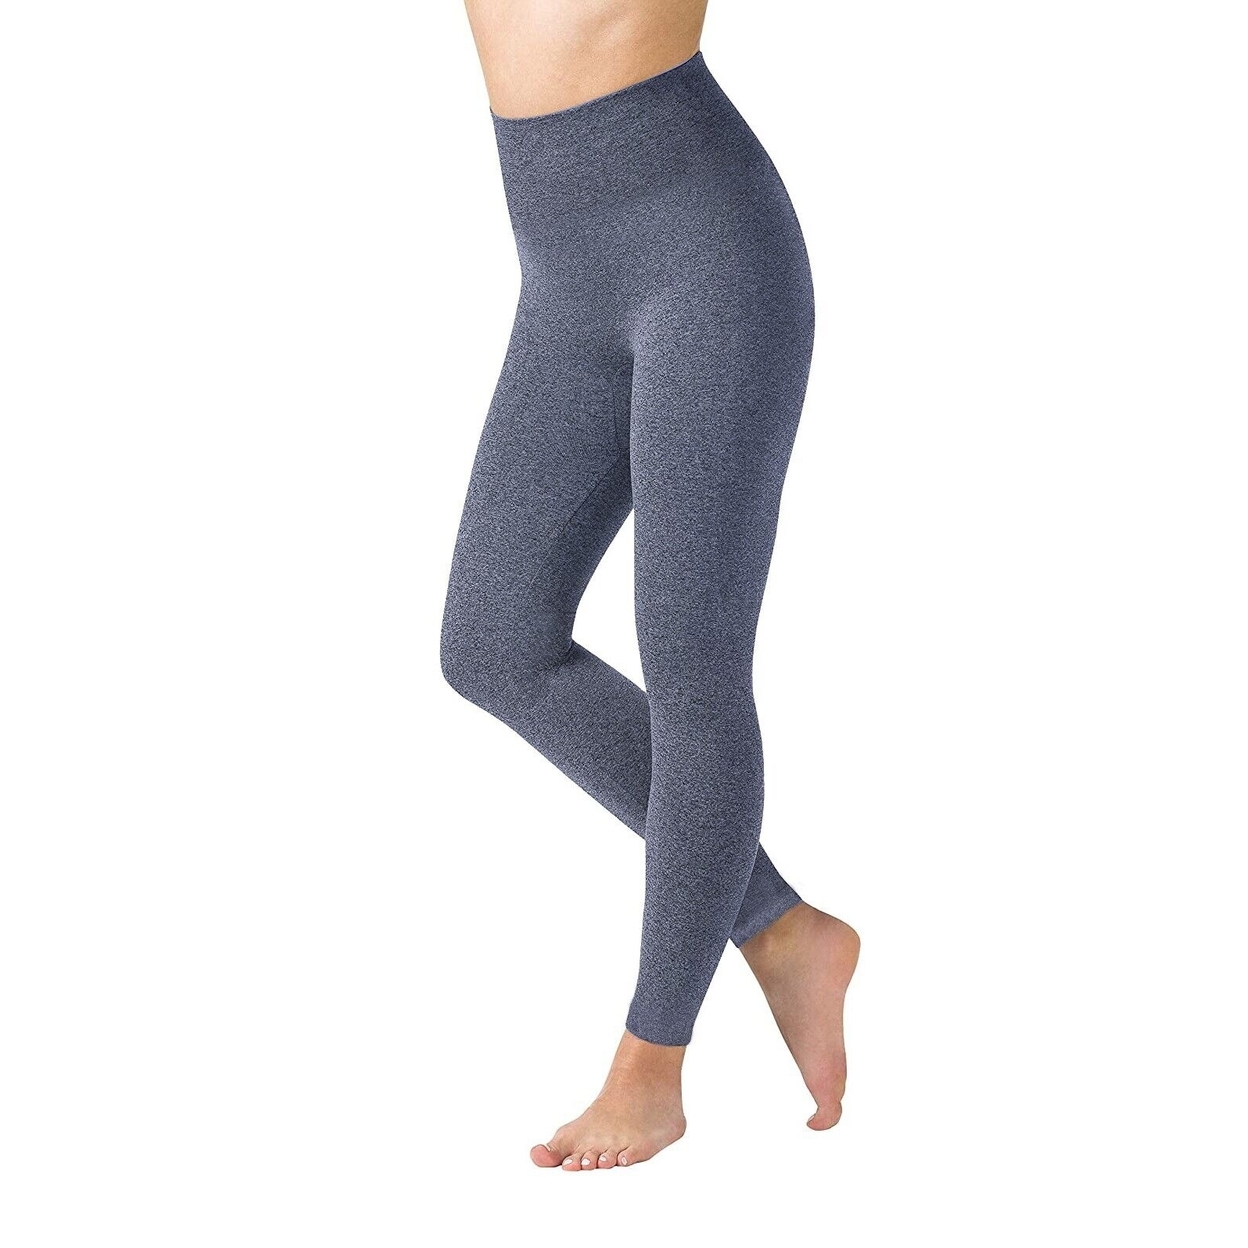 Multi-Packs Women High Waisted Fleece Lined Marled Leggings Ultra Soft Warm Pant - Charcoal/navy, 2, X-large